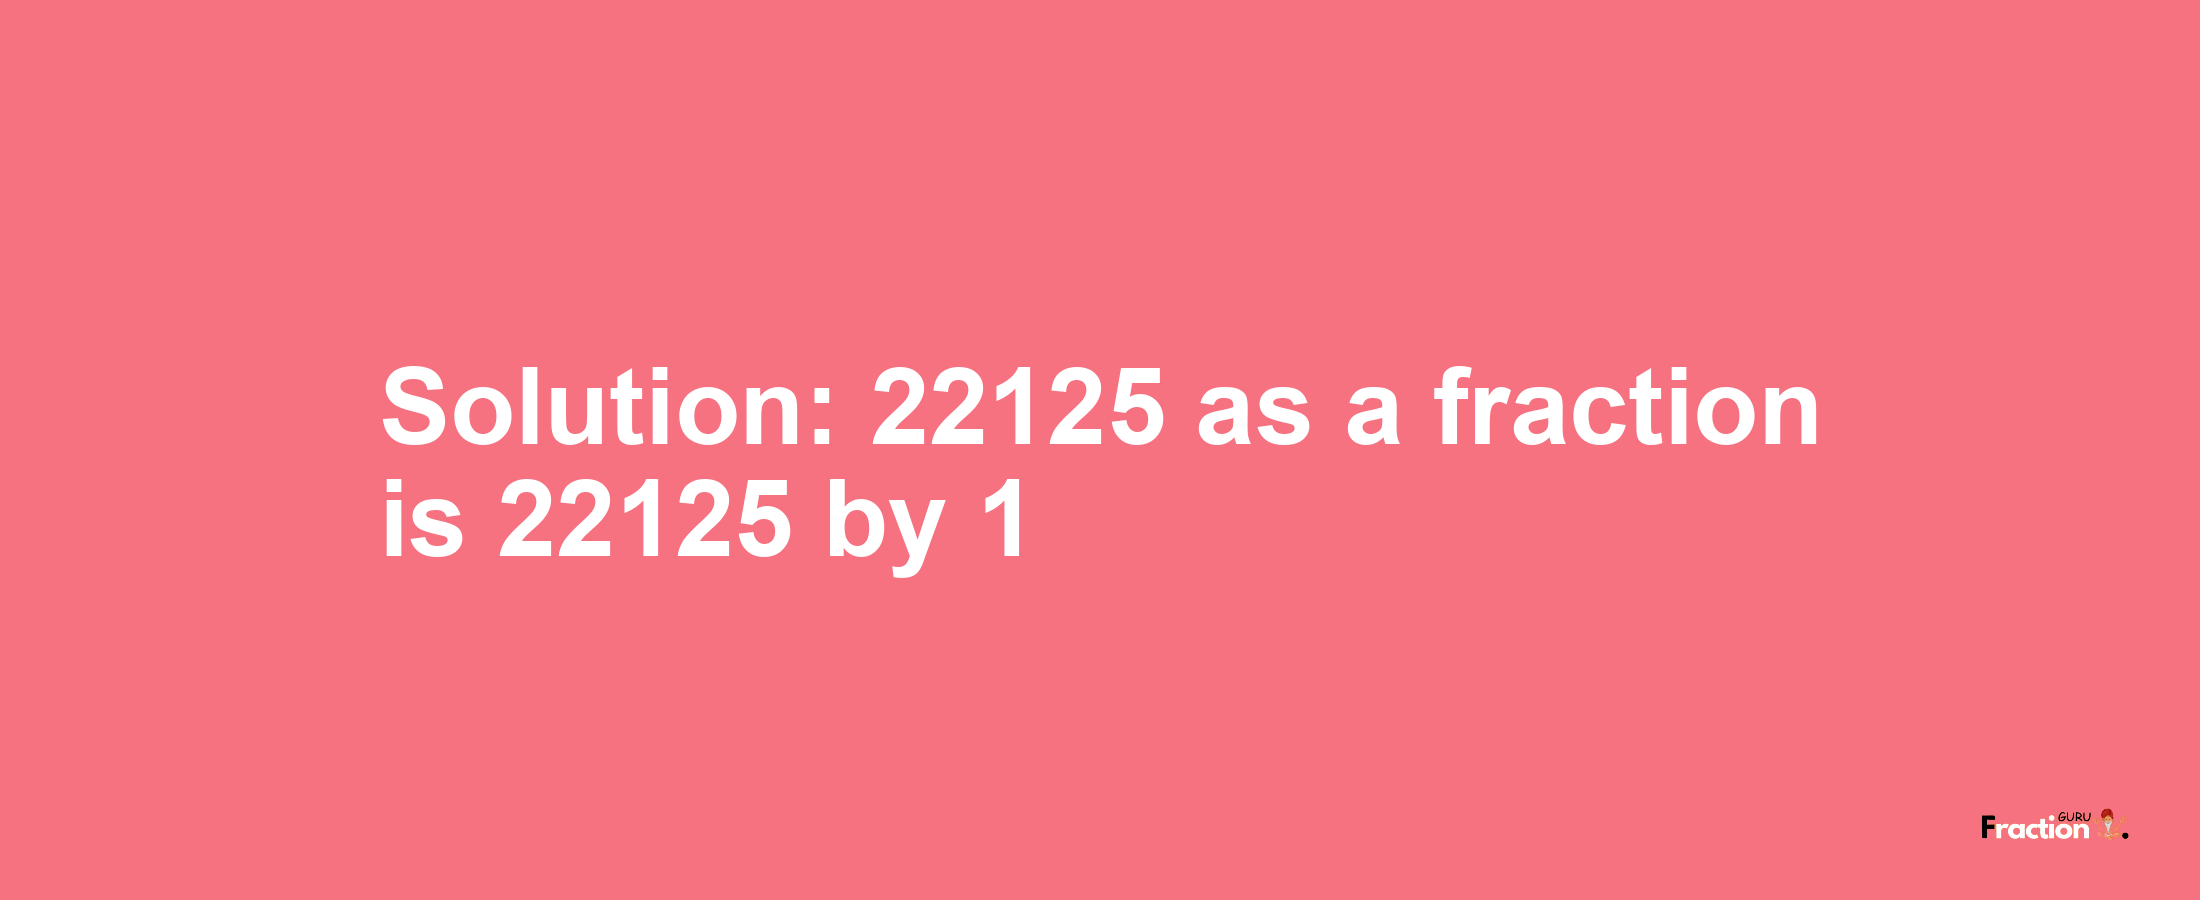 Solution:22125 as a fraction is 22125/1